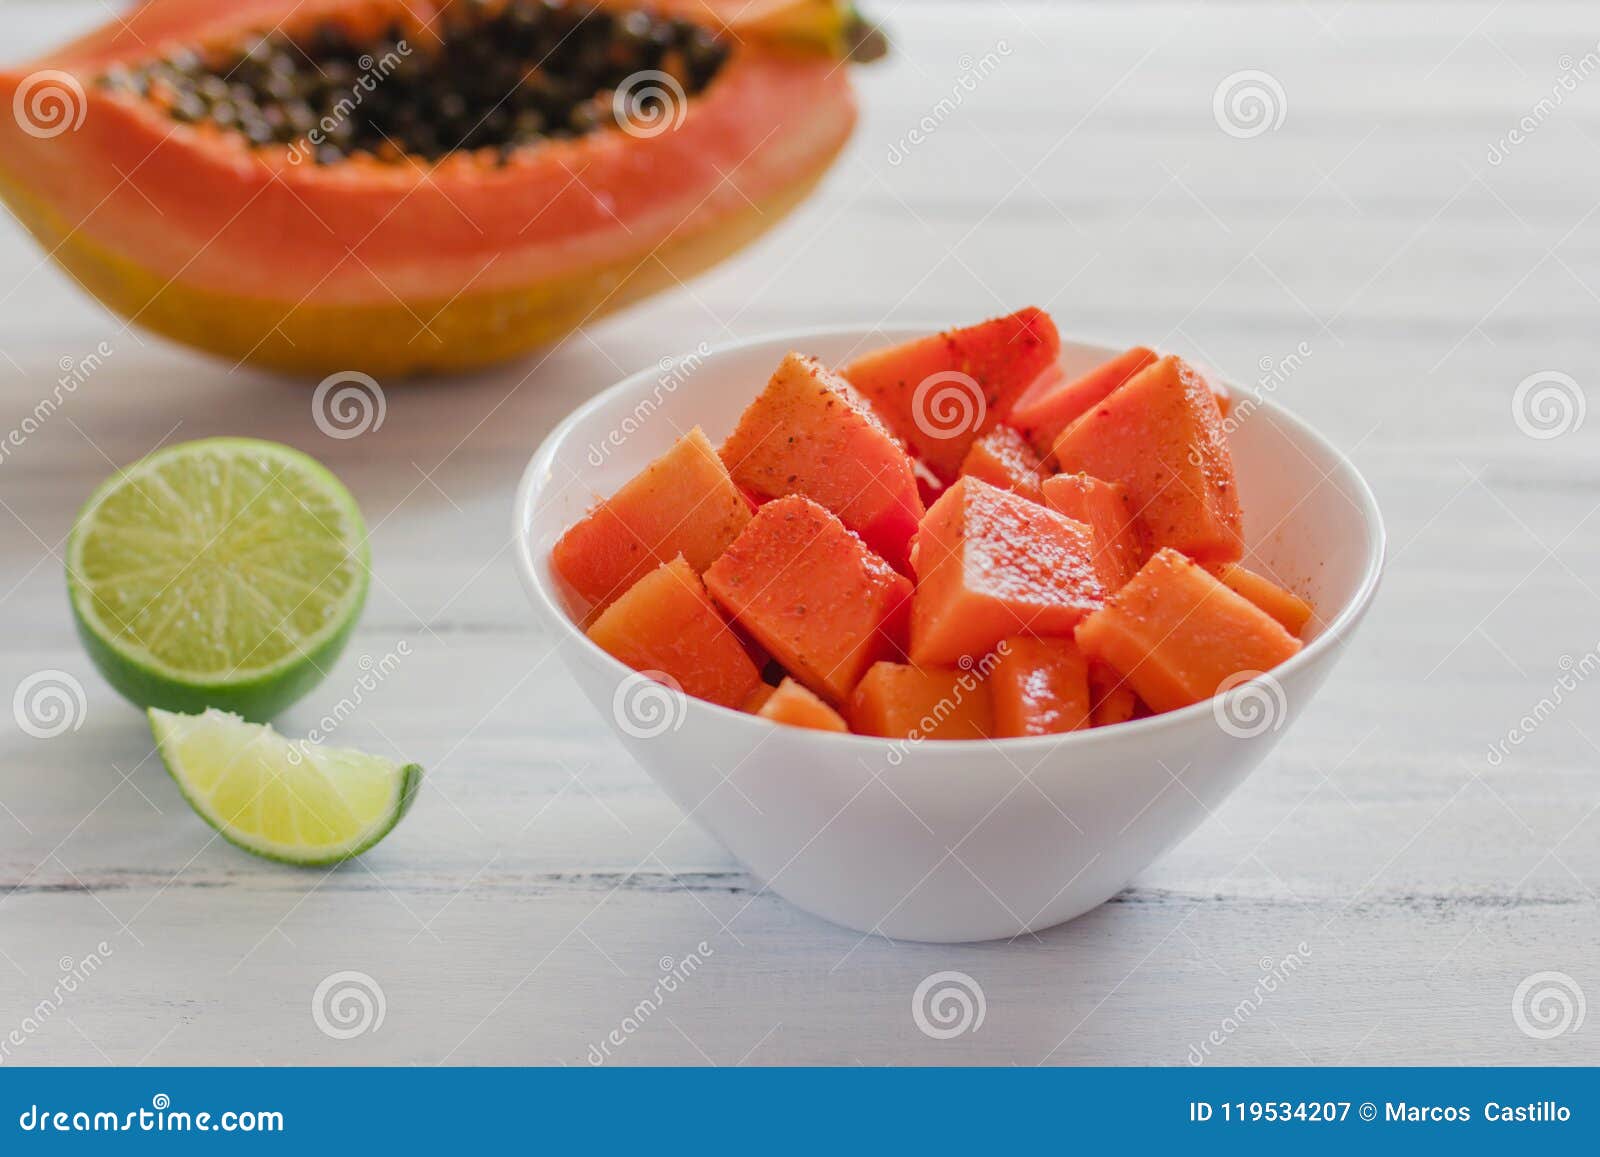 papaya fruit with chili, mexican snack, spicy food in mexico